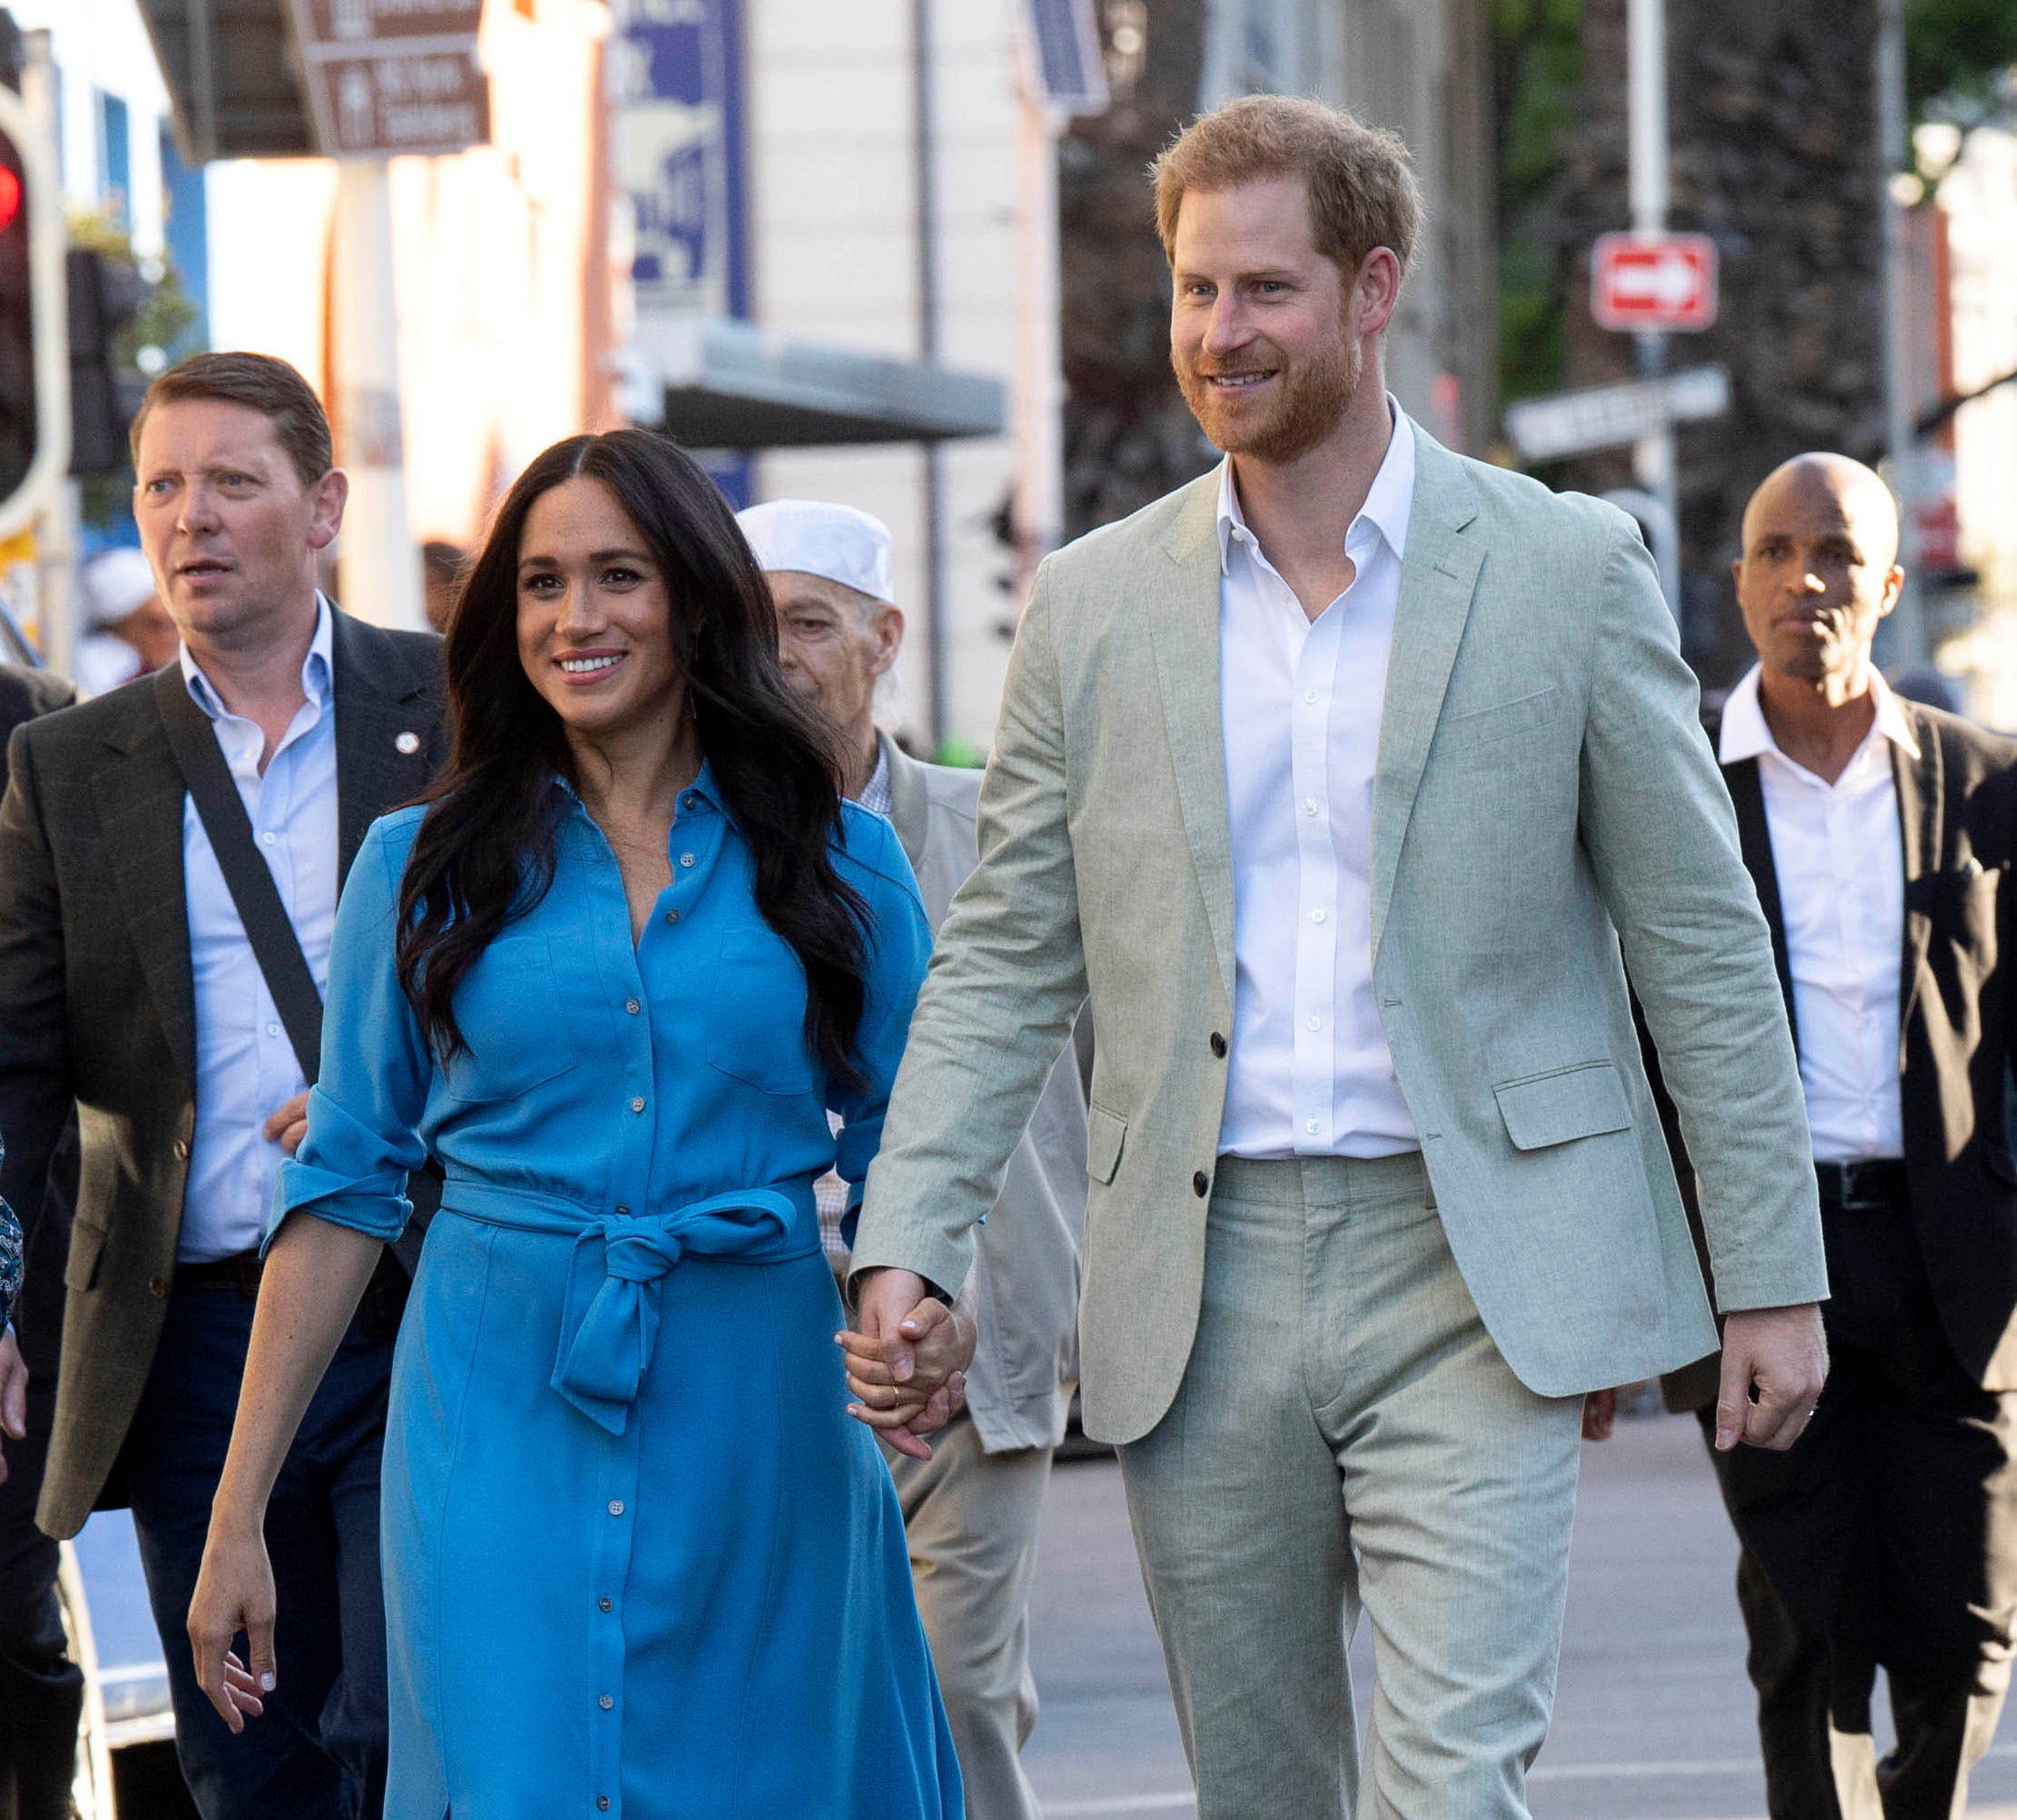 Meghan Markle, Prince Harry First Podcast Episode